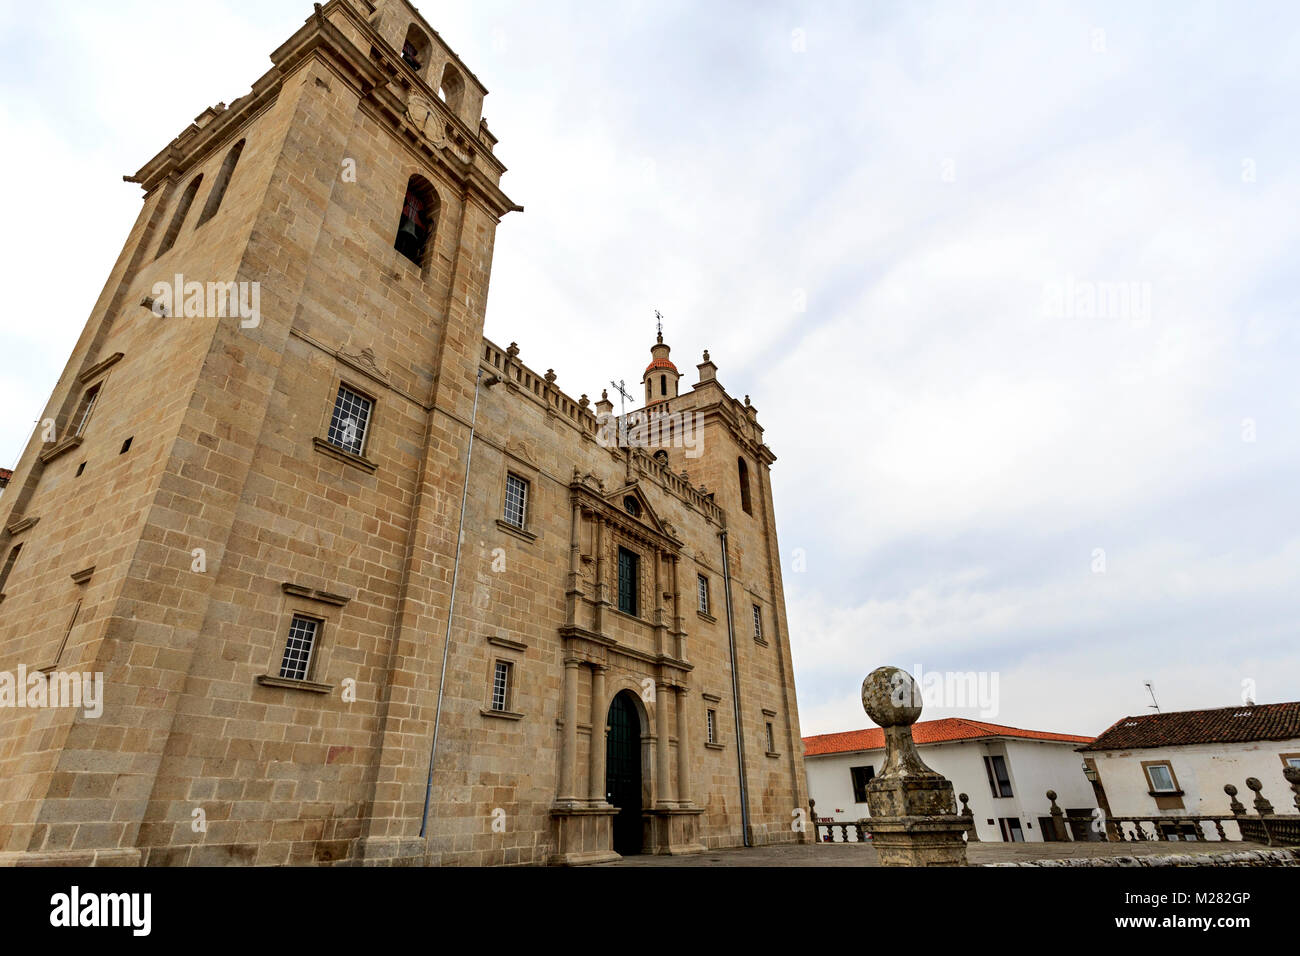 Catholic cathedral of mannerist style with an austere facade flanked by imposed bell towers on each side and surmounted by rail, in Miranda do Douro,  Stock Photo